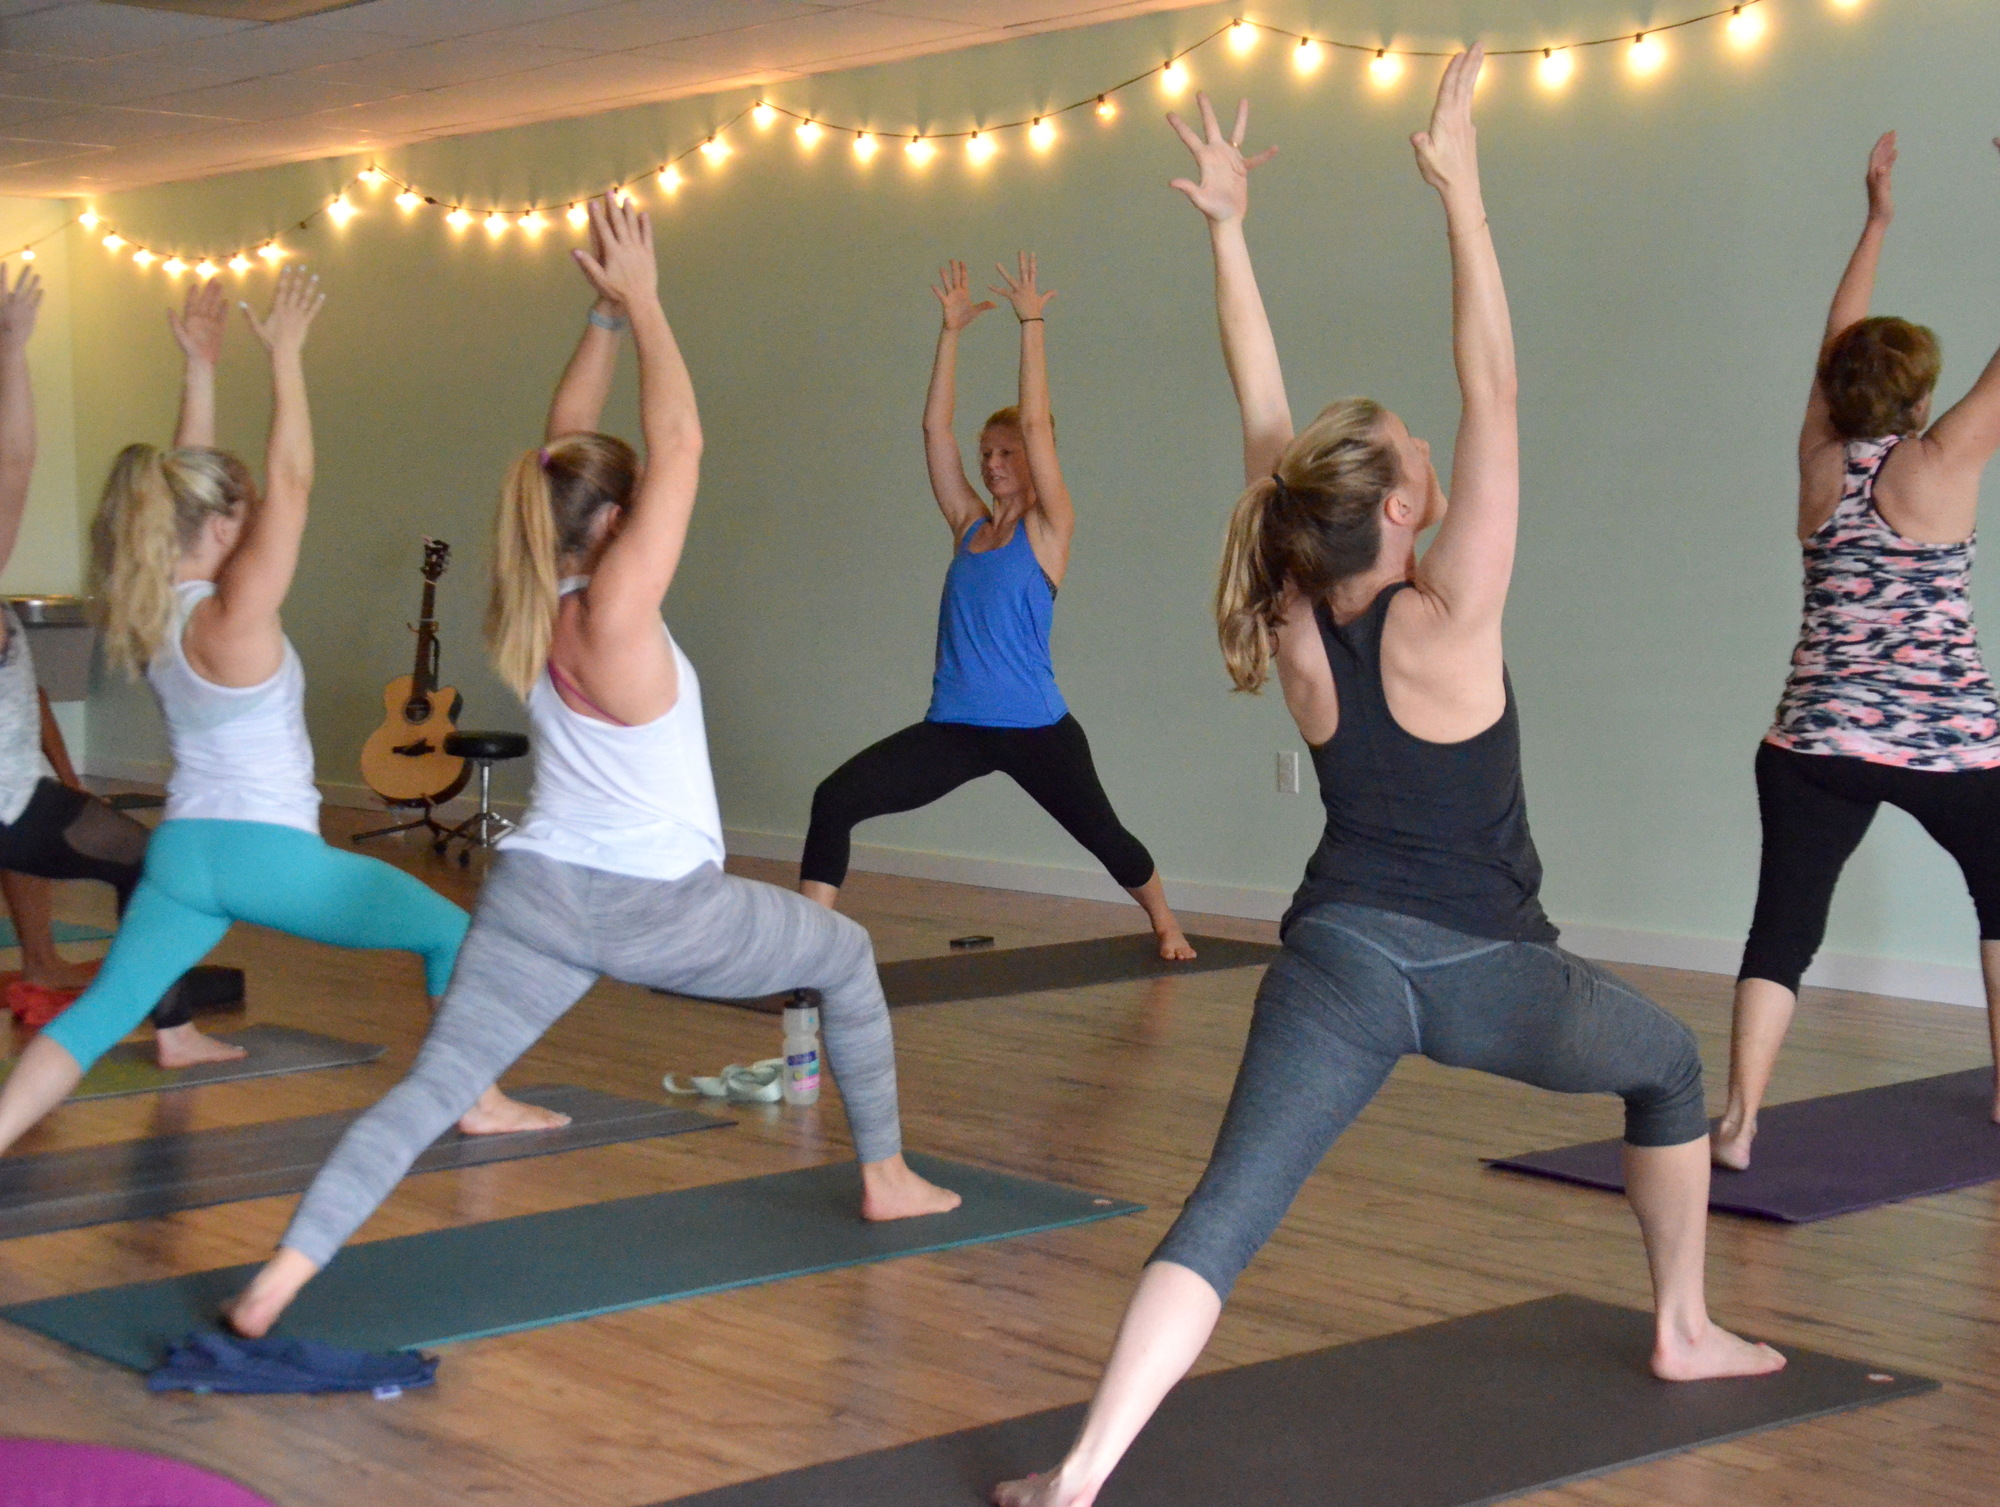 Holly Garrison leads a Sunday morning class at Firefly Yoga in Ocoee.